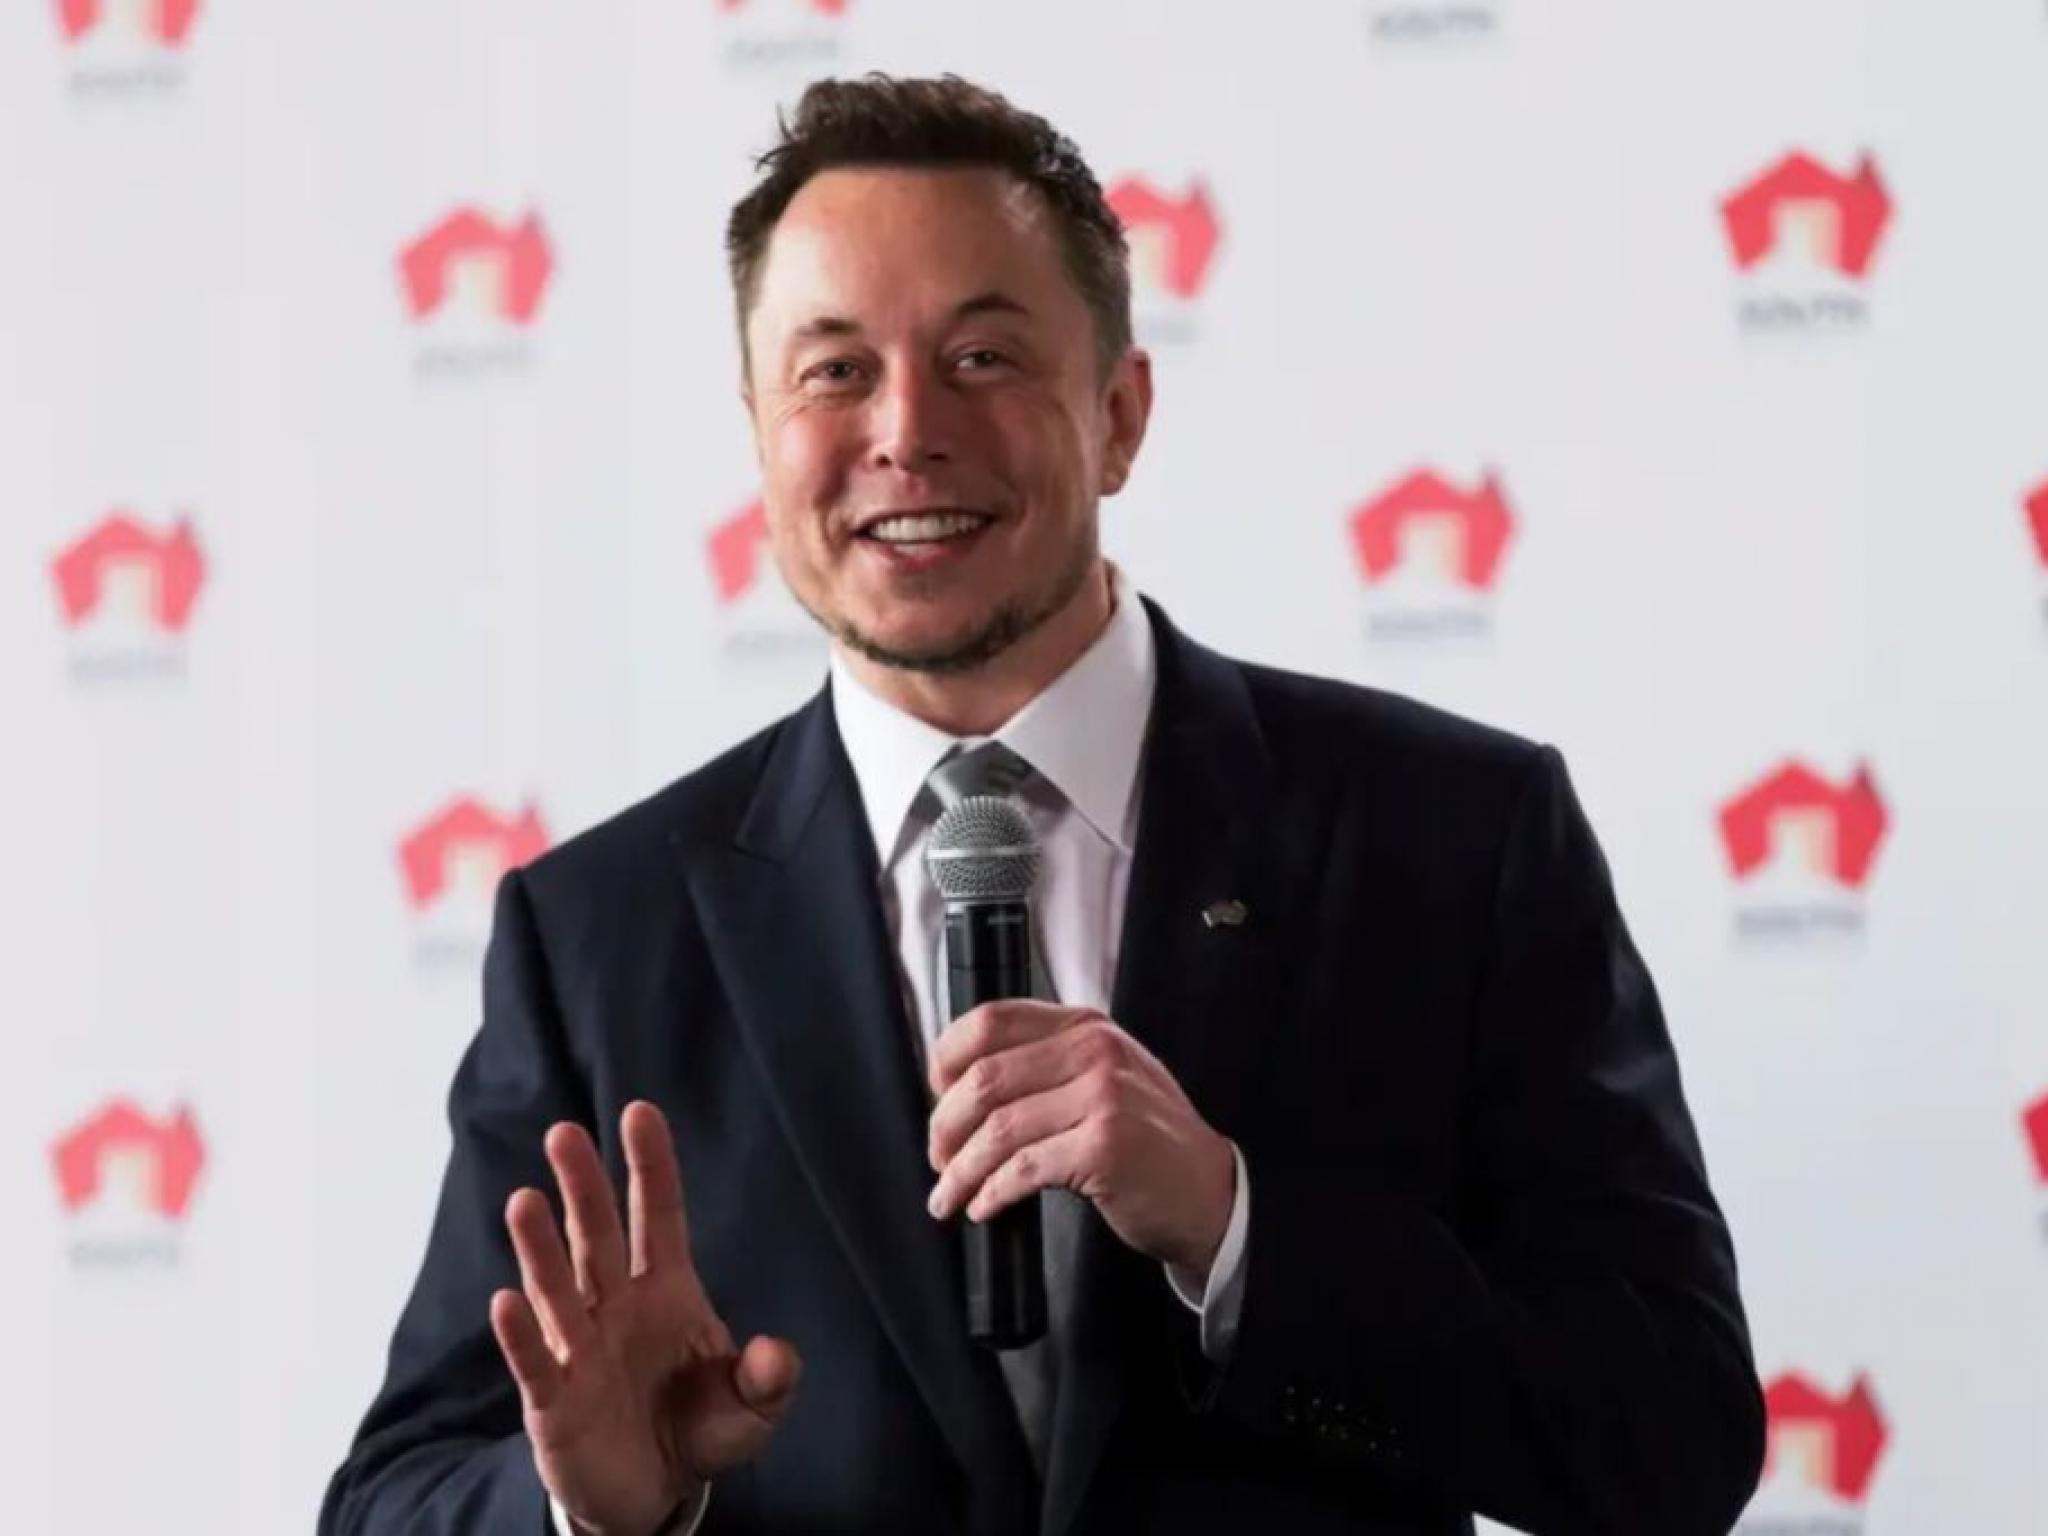  i-did-not-ask-for-it-elon-musk-thanks-tesla-team-for-putting-together-video-urging-shareholders-to-vote-for-ceos-2018-pay-package 